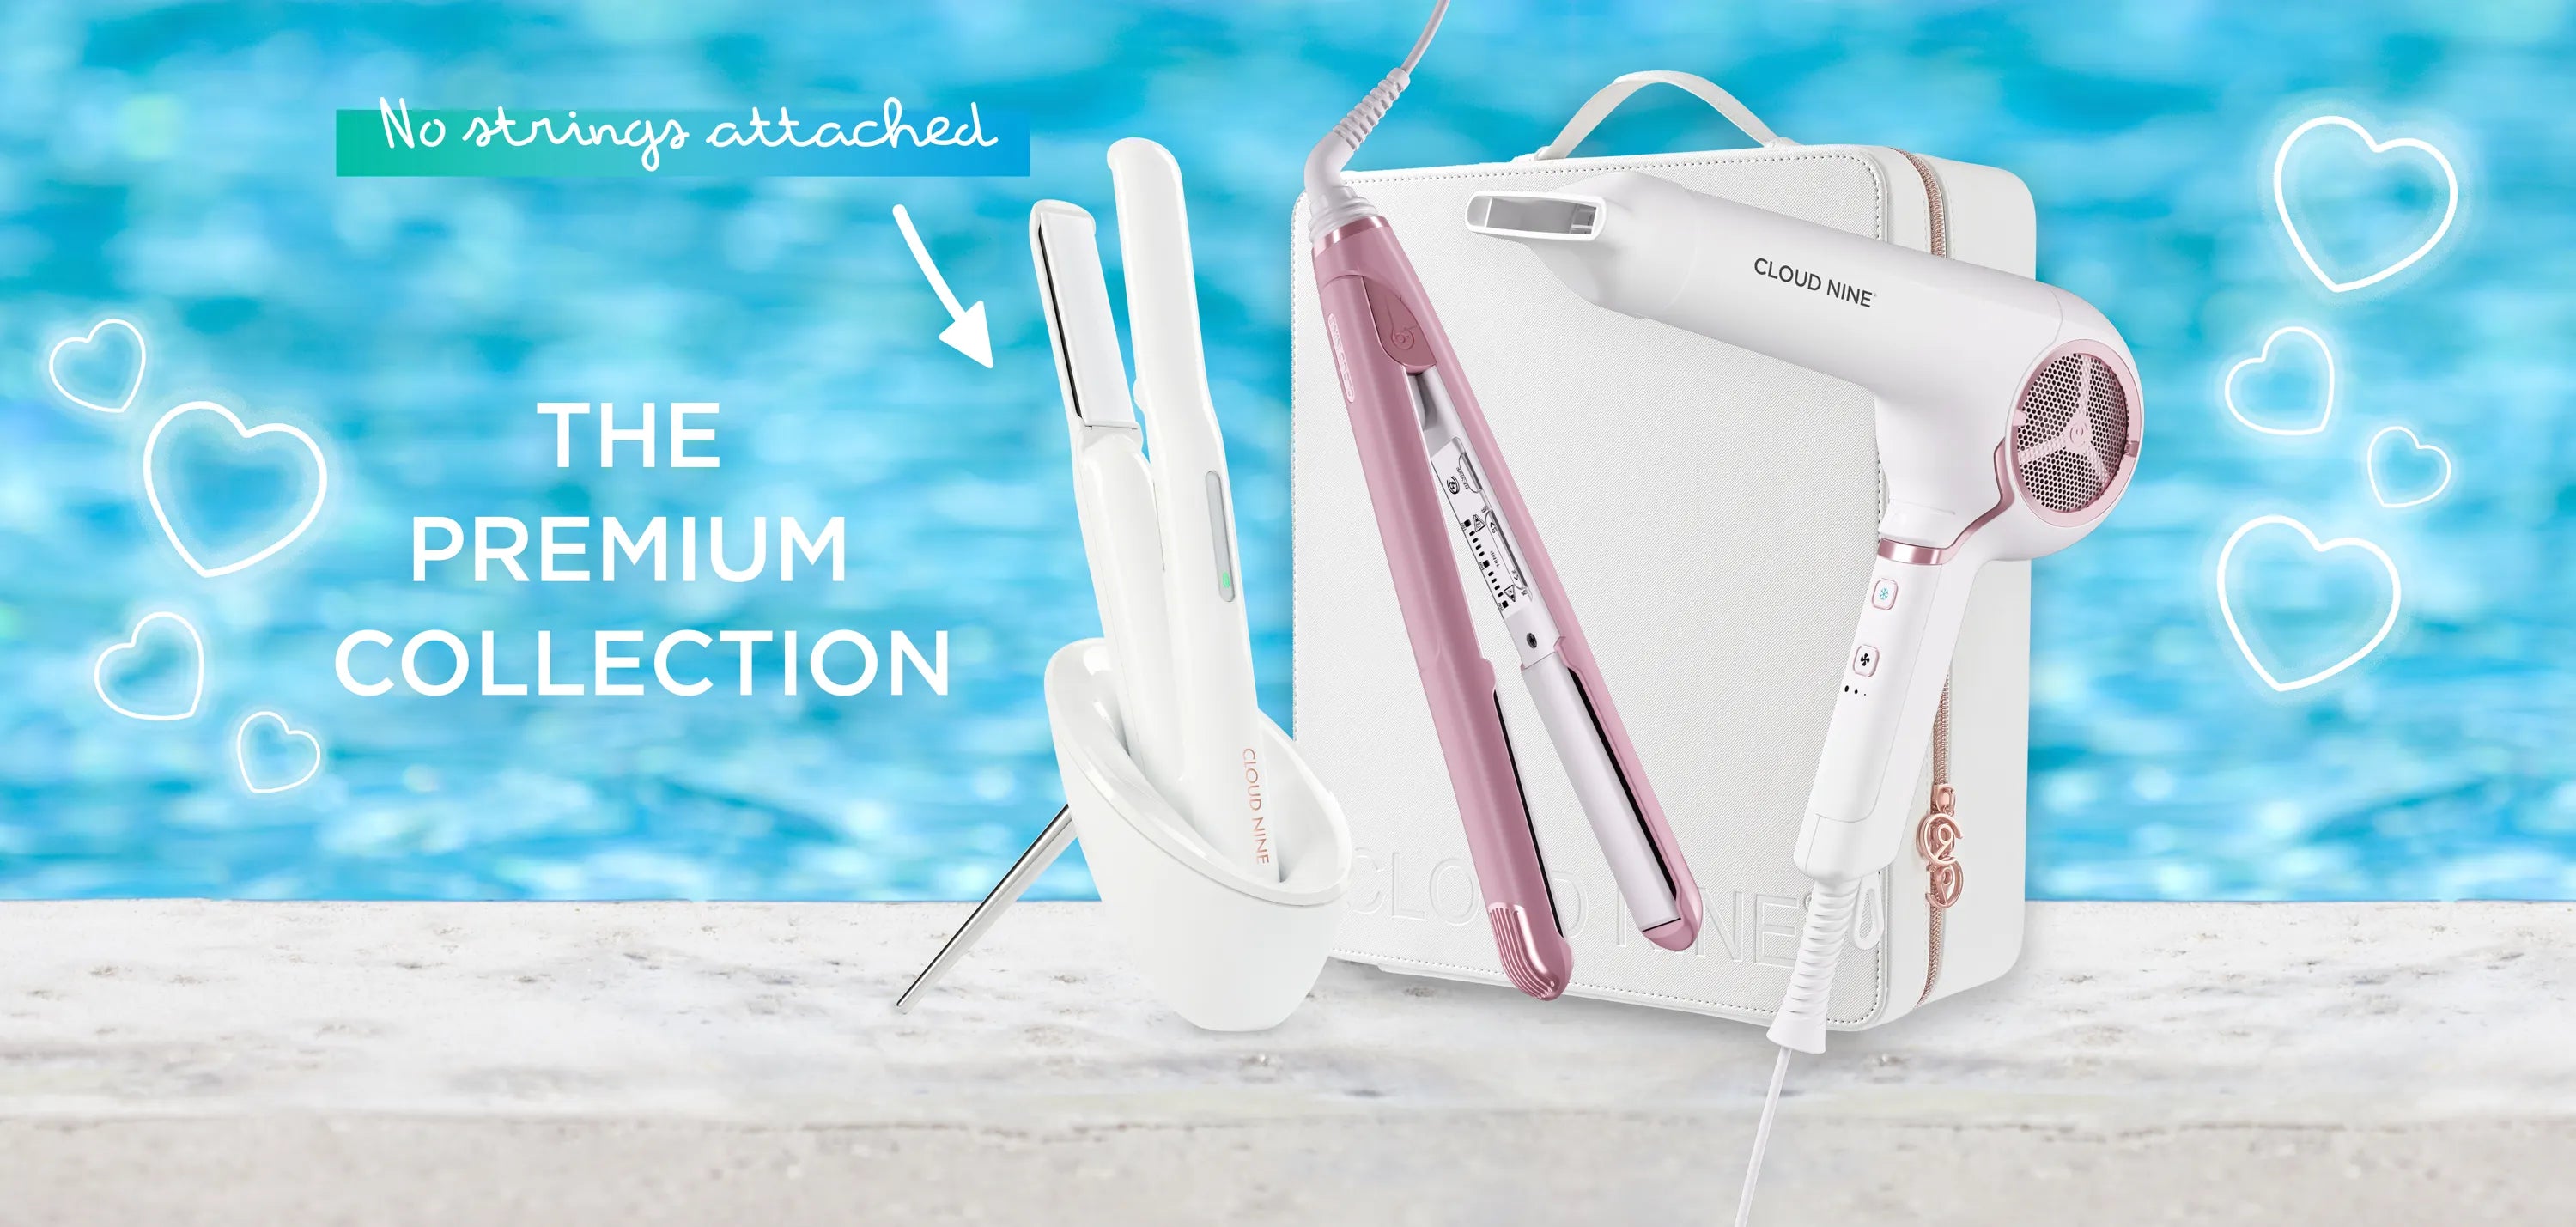 Image showcasing the CLOUD NINE premium collection including the white Cordless Iron, pink Original Iron Pro and white Airshot Pro on a beach style background.